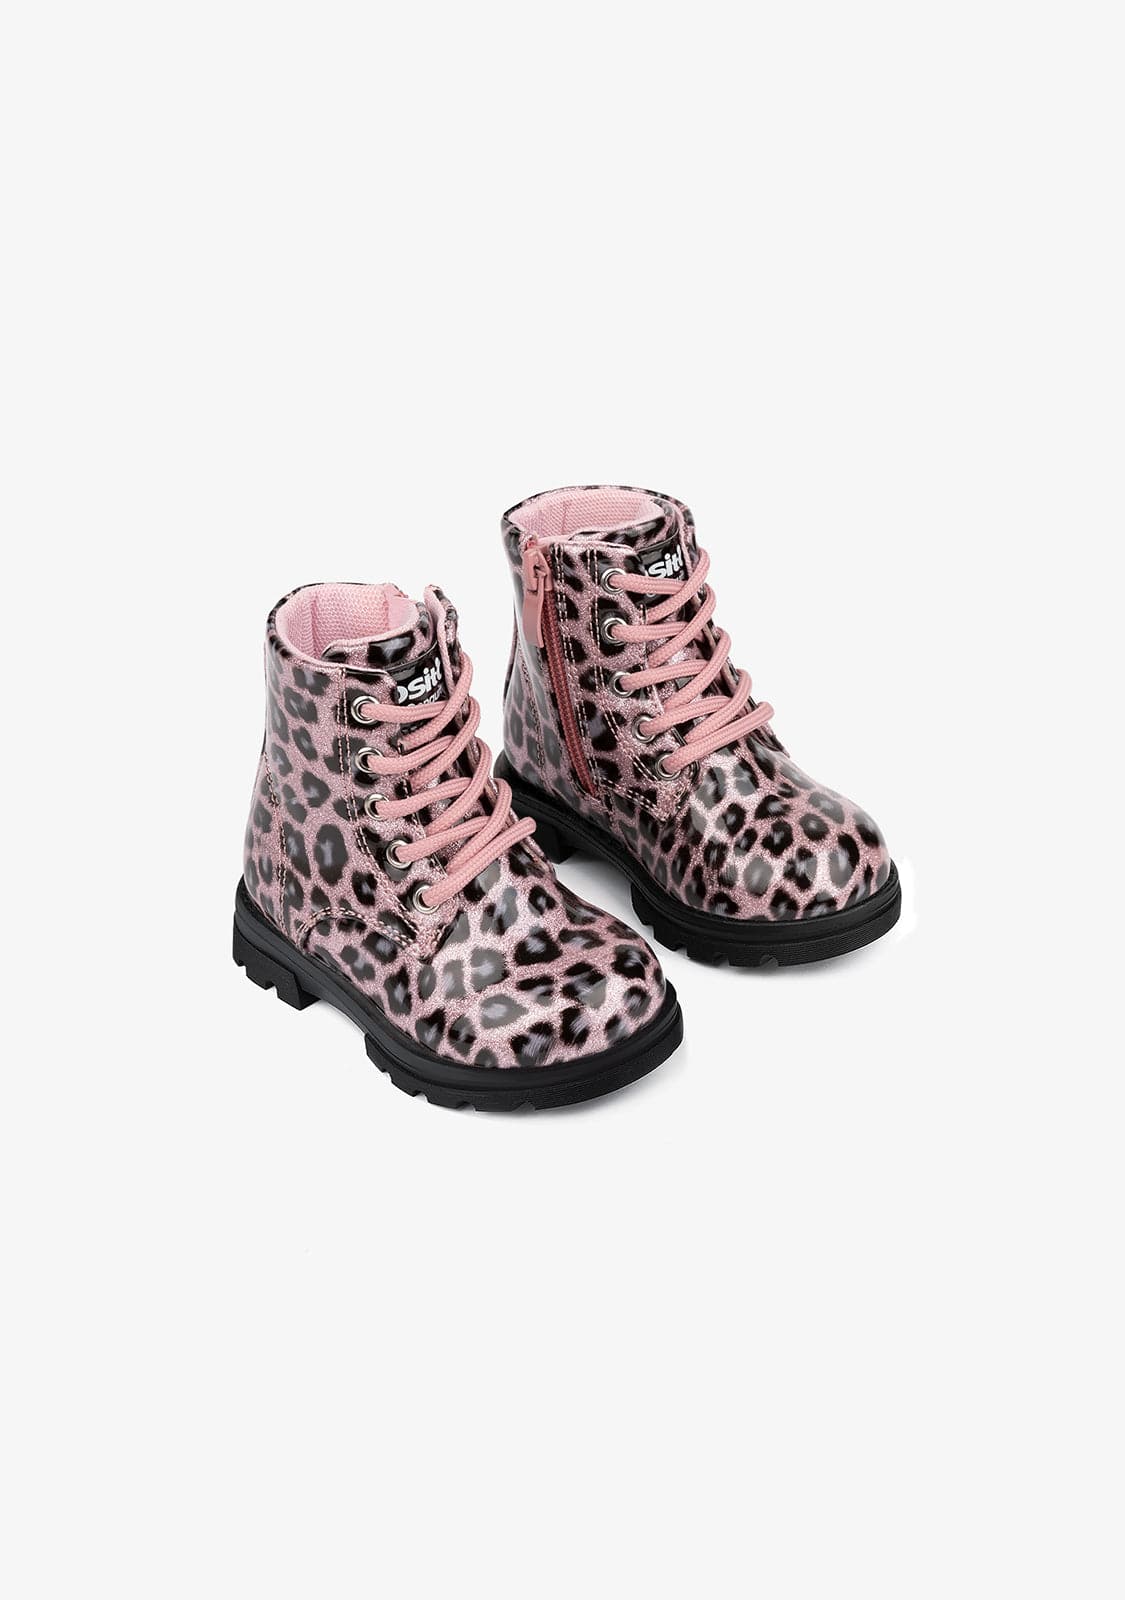 OSITO Shoes Baby's Pink Leopard Combat Boots